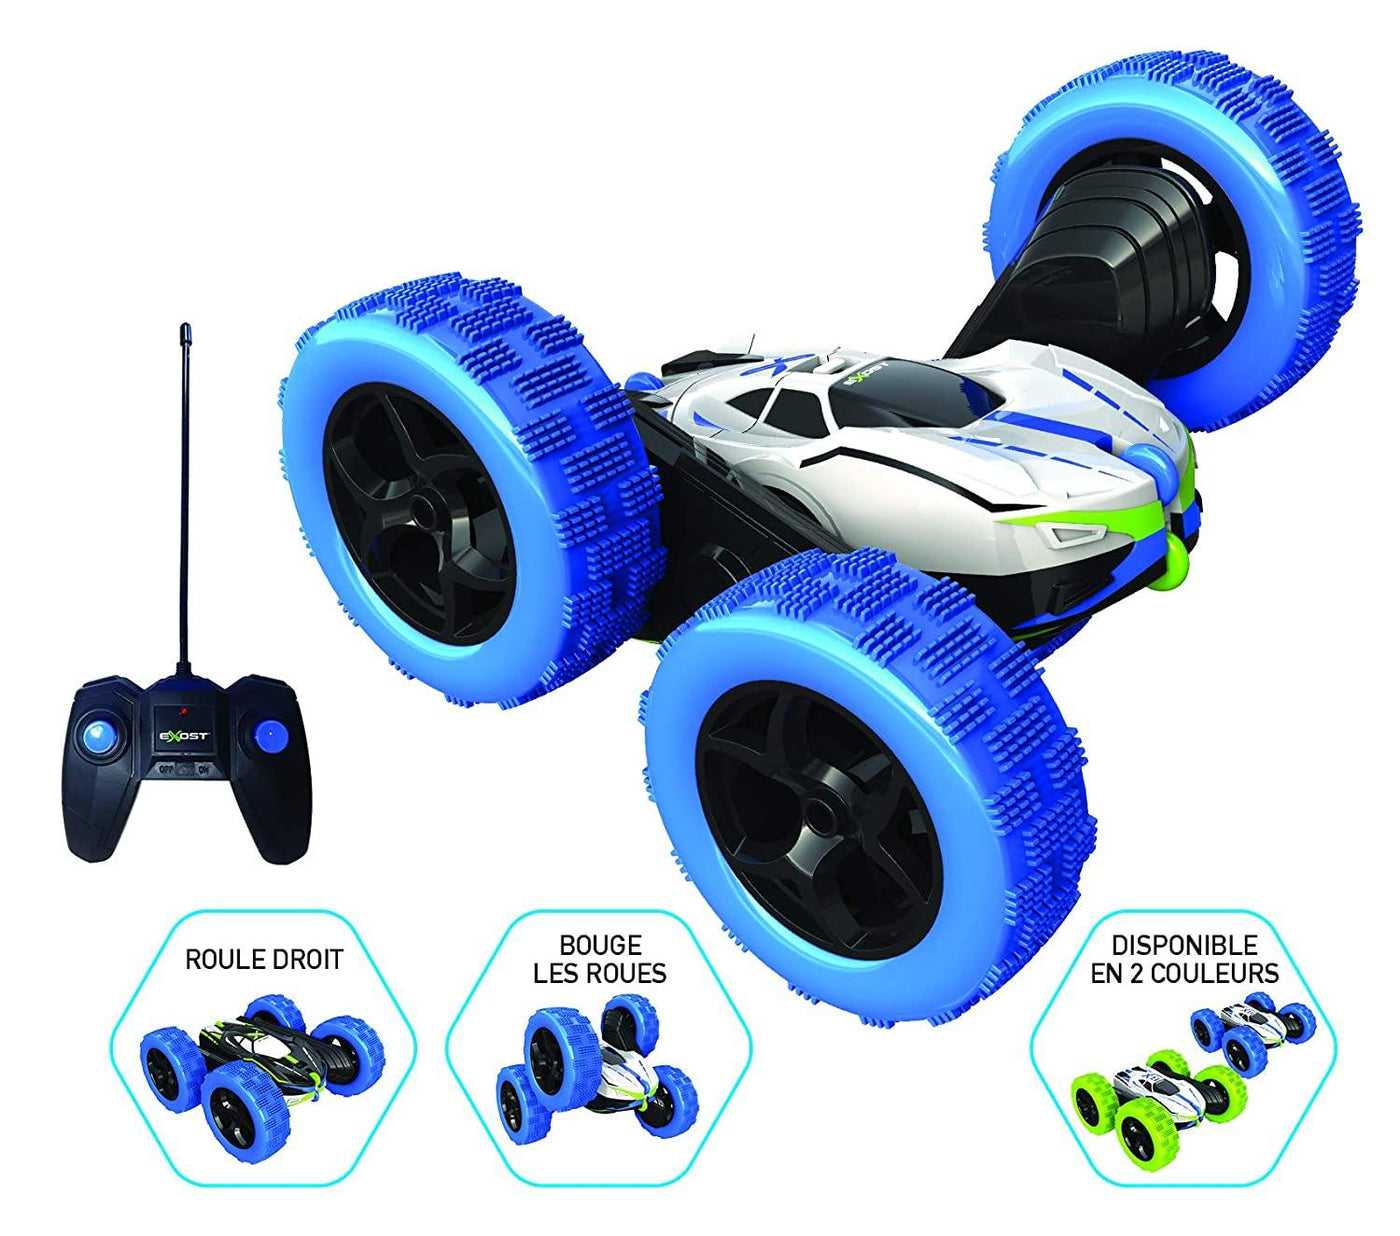 Exost Storm RC Car! (Perform On 2 Faces); Scale: 1:18; Speed: 8 km/h - Krazy Caterpillar 